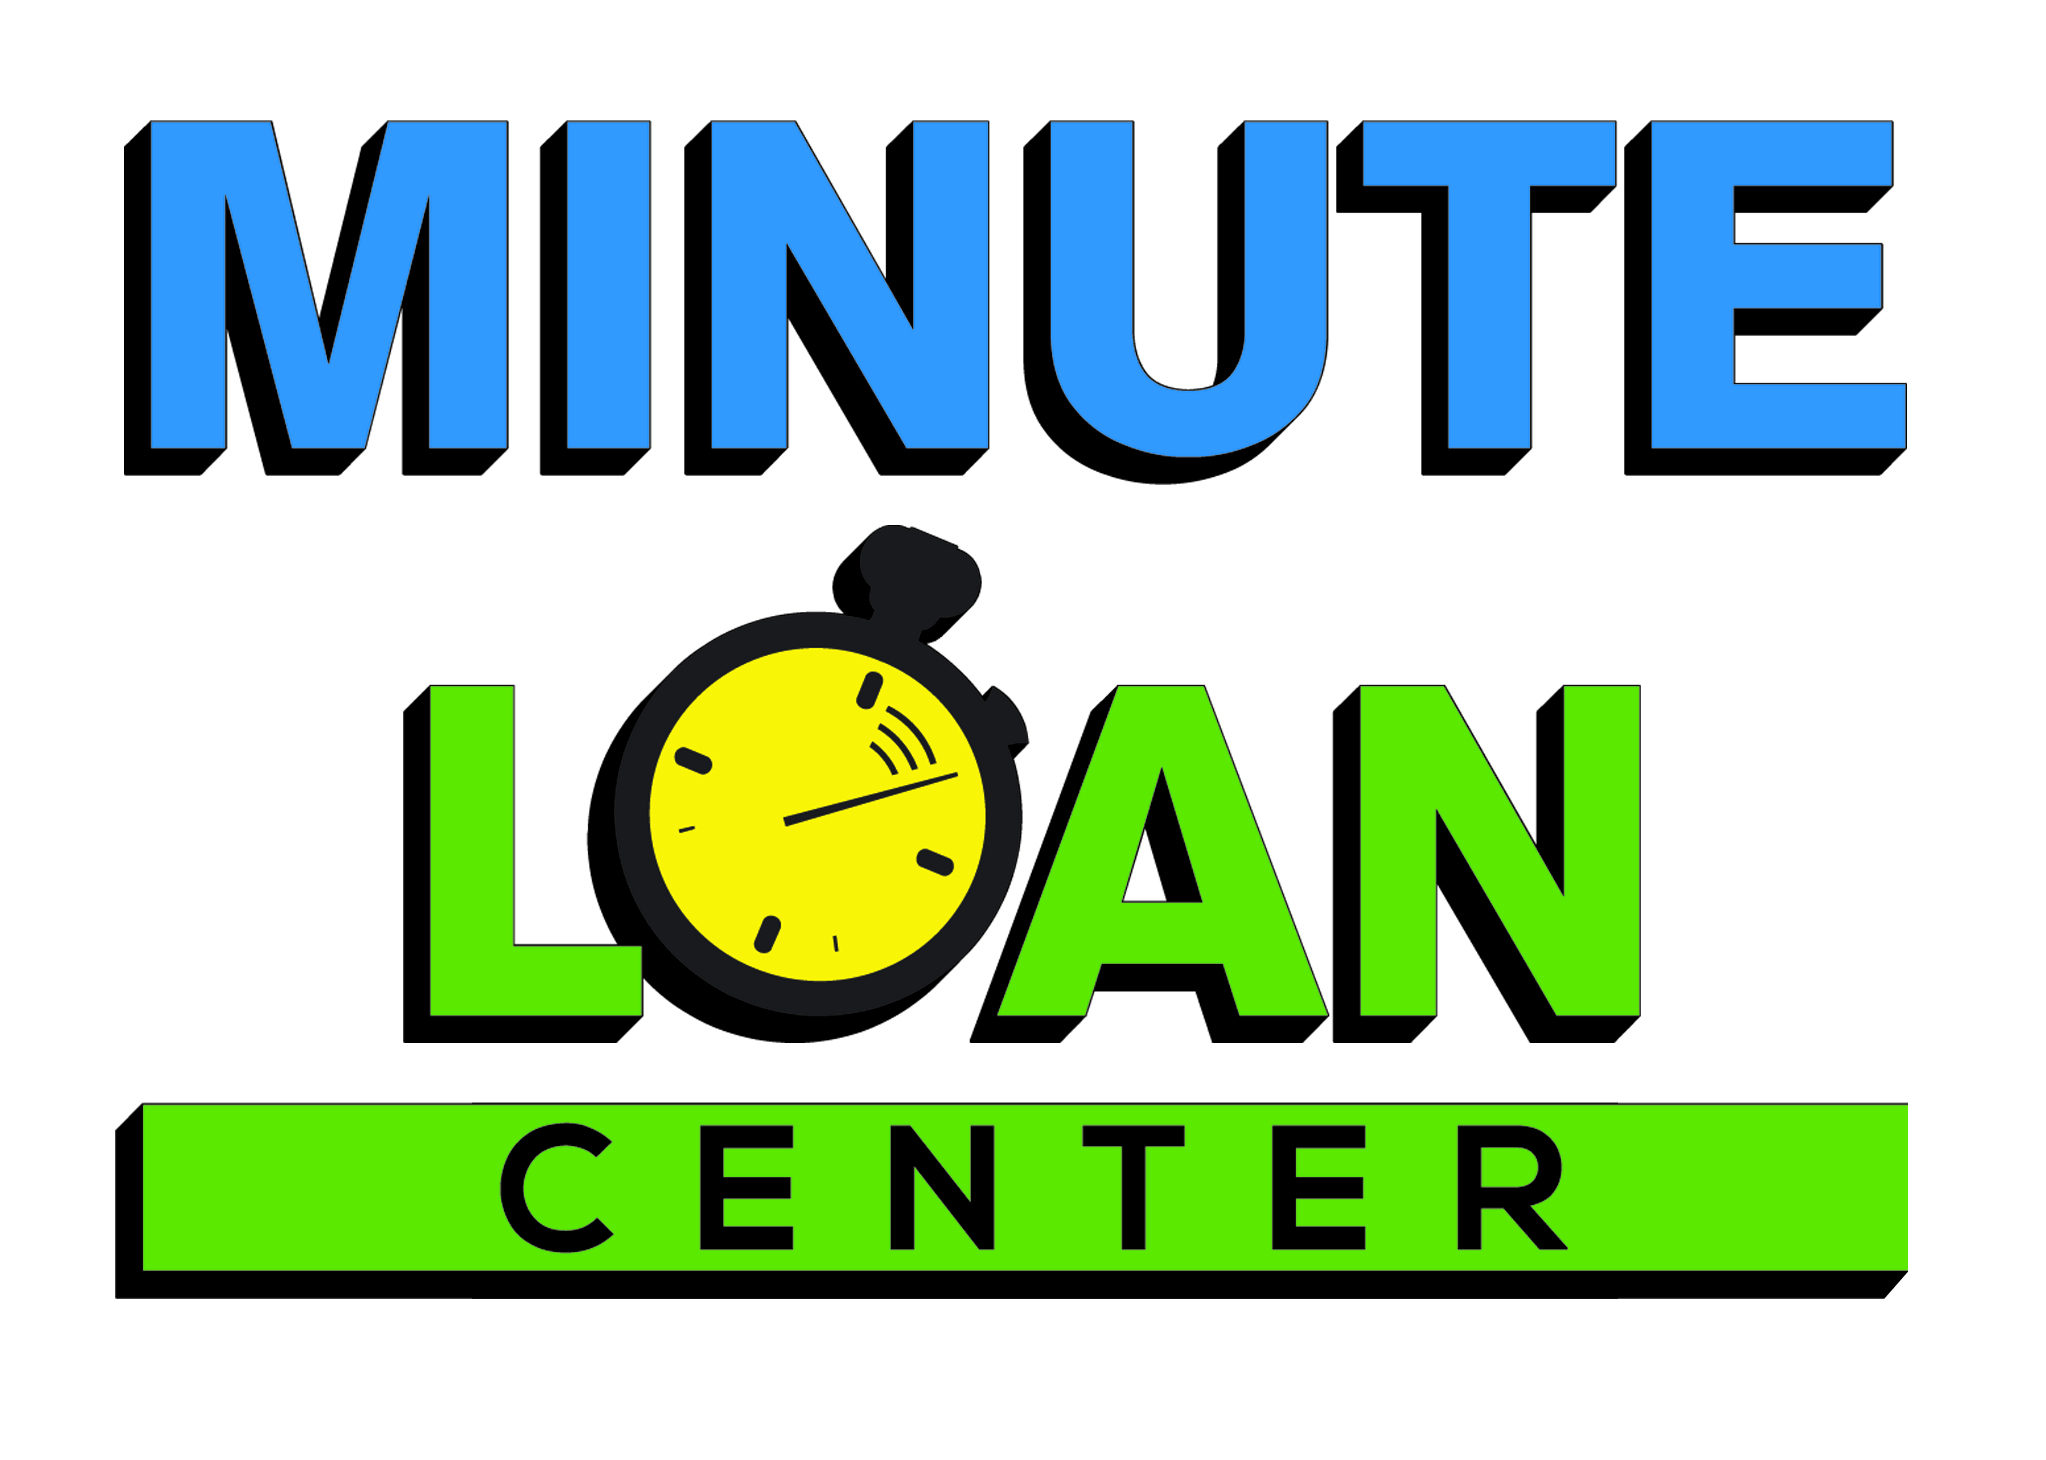 Picture Two: Minute Loan Center Logo

Minute Loan Center has been your neighborhood community lender for over 25 years. We have helped hundreds of thousands of hardworking Americans find the funds they need, often when others would not help them. Our personalized Installment Loans start with a quick application process and we offer a variety of funding options online and in-store including virtually instant funding with Minute Money. Visit our in-store locations across: Delaware, Louisiana, Mississippi, Nevada, Utah or apply online 24/7 in Missouri and South Carolina.  For more information on Minute Loan Center visit their website at www.MinuteLoanCenter.com / #MinuteLoanCenter
